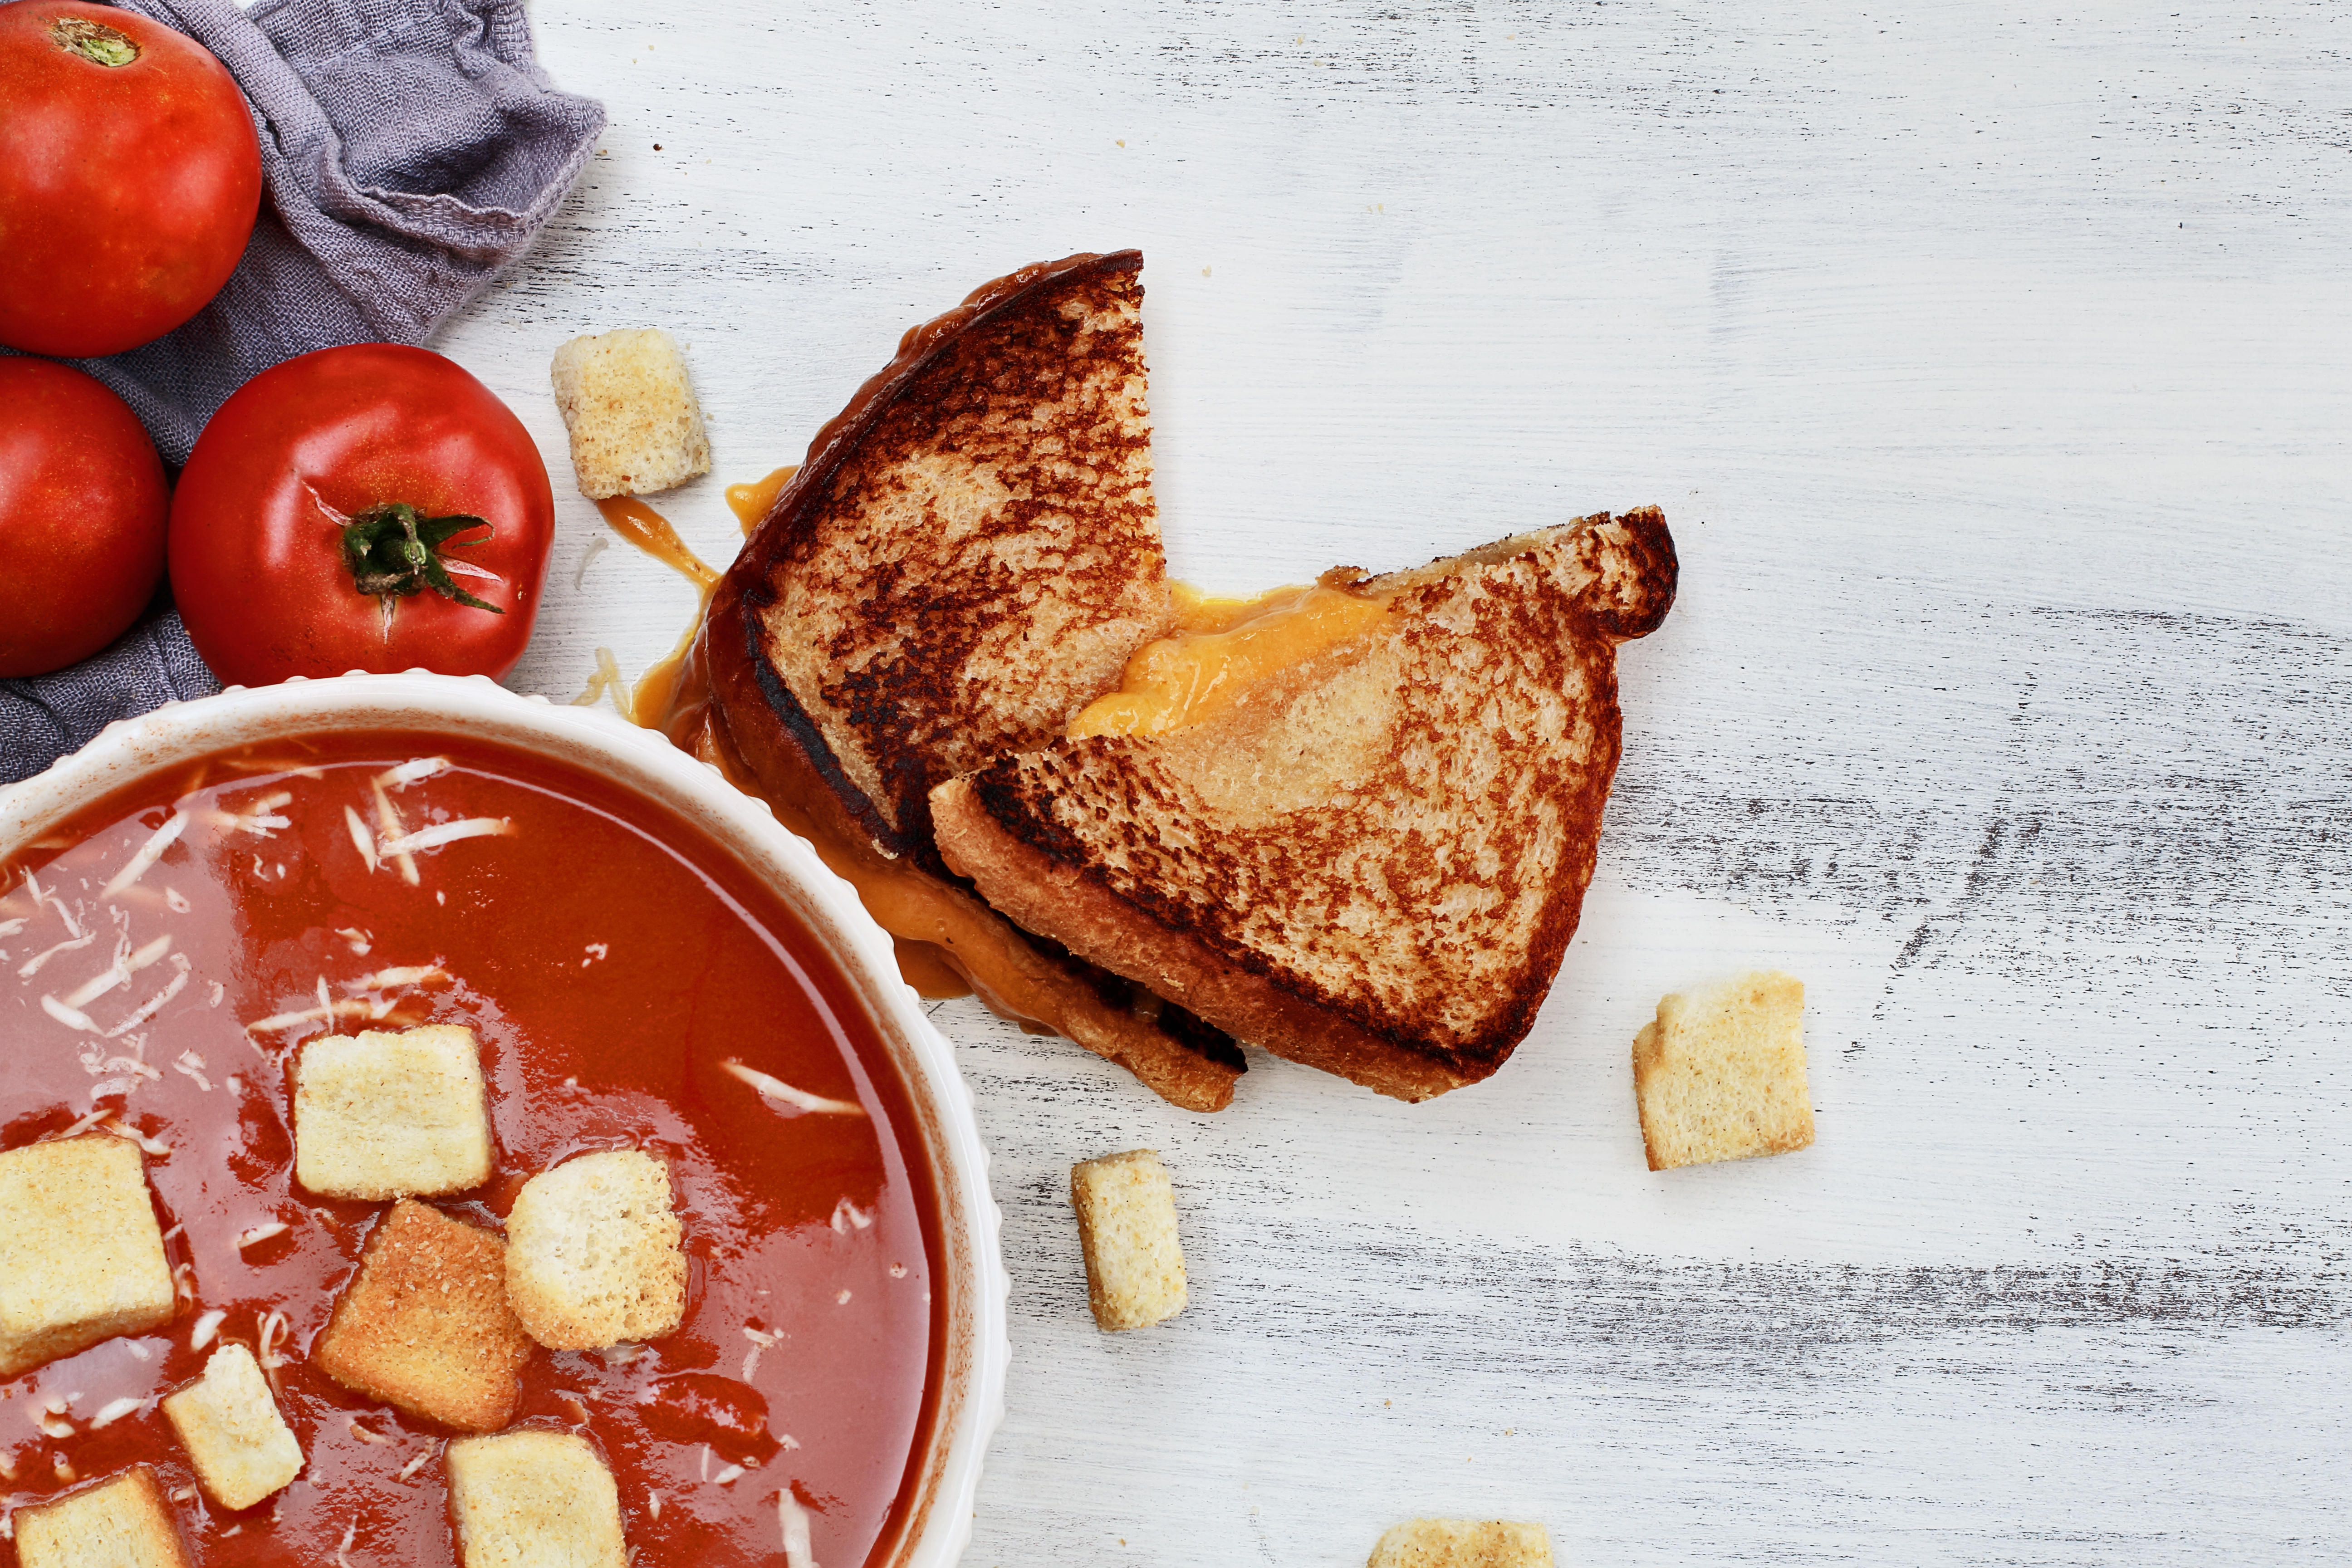 Tomato Soup garnished with Parmesan cheese and croutons